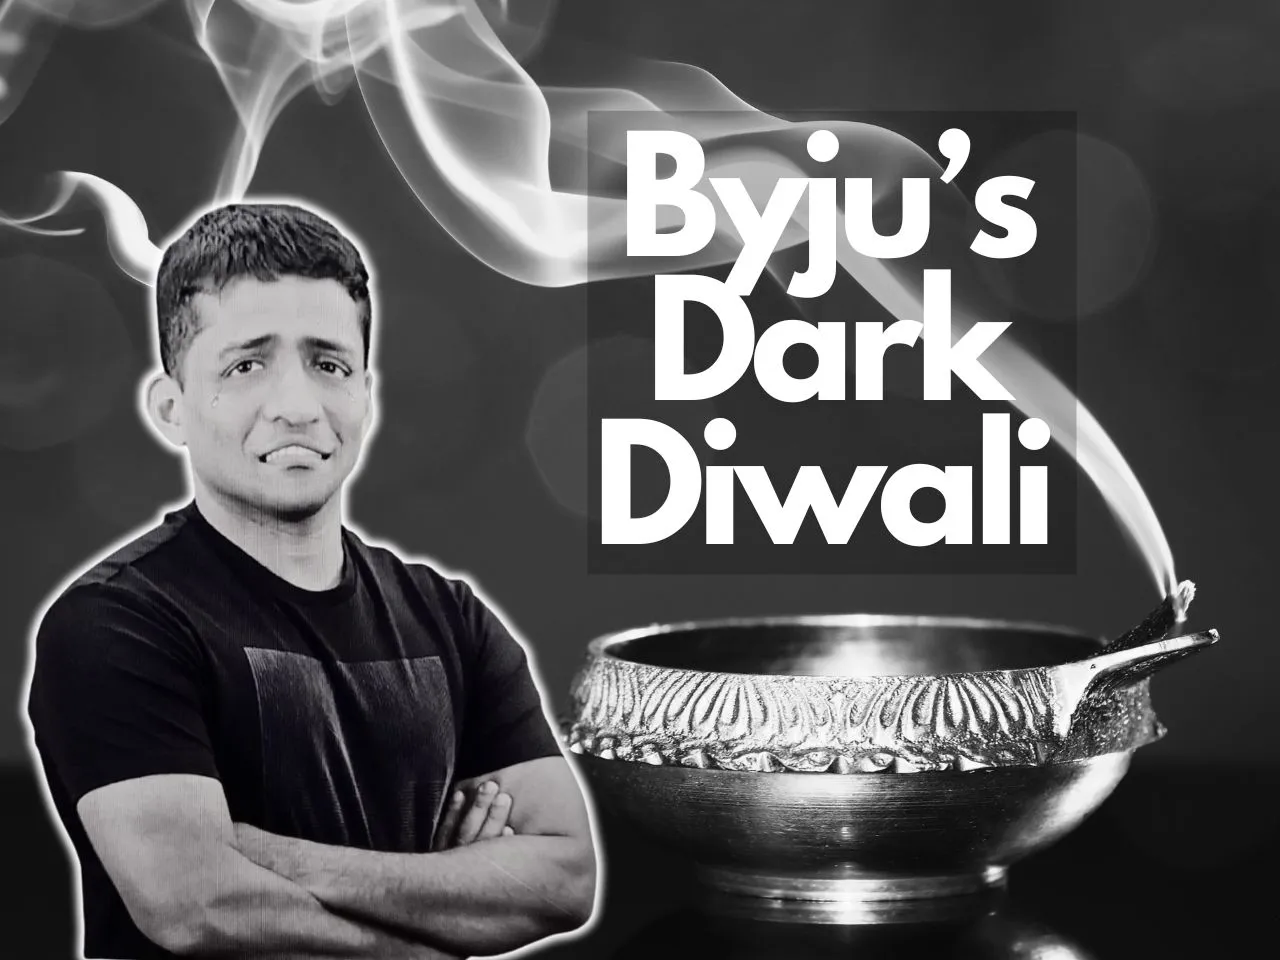 BYJUS Diwali Layoff Festival of Lights in the Shadows